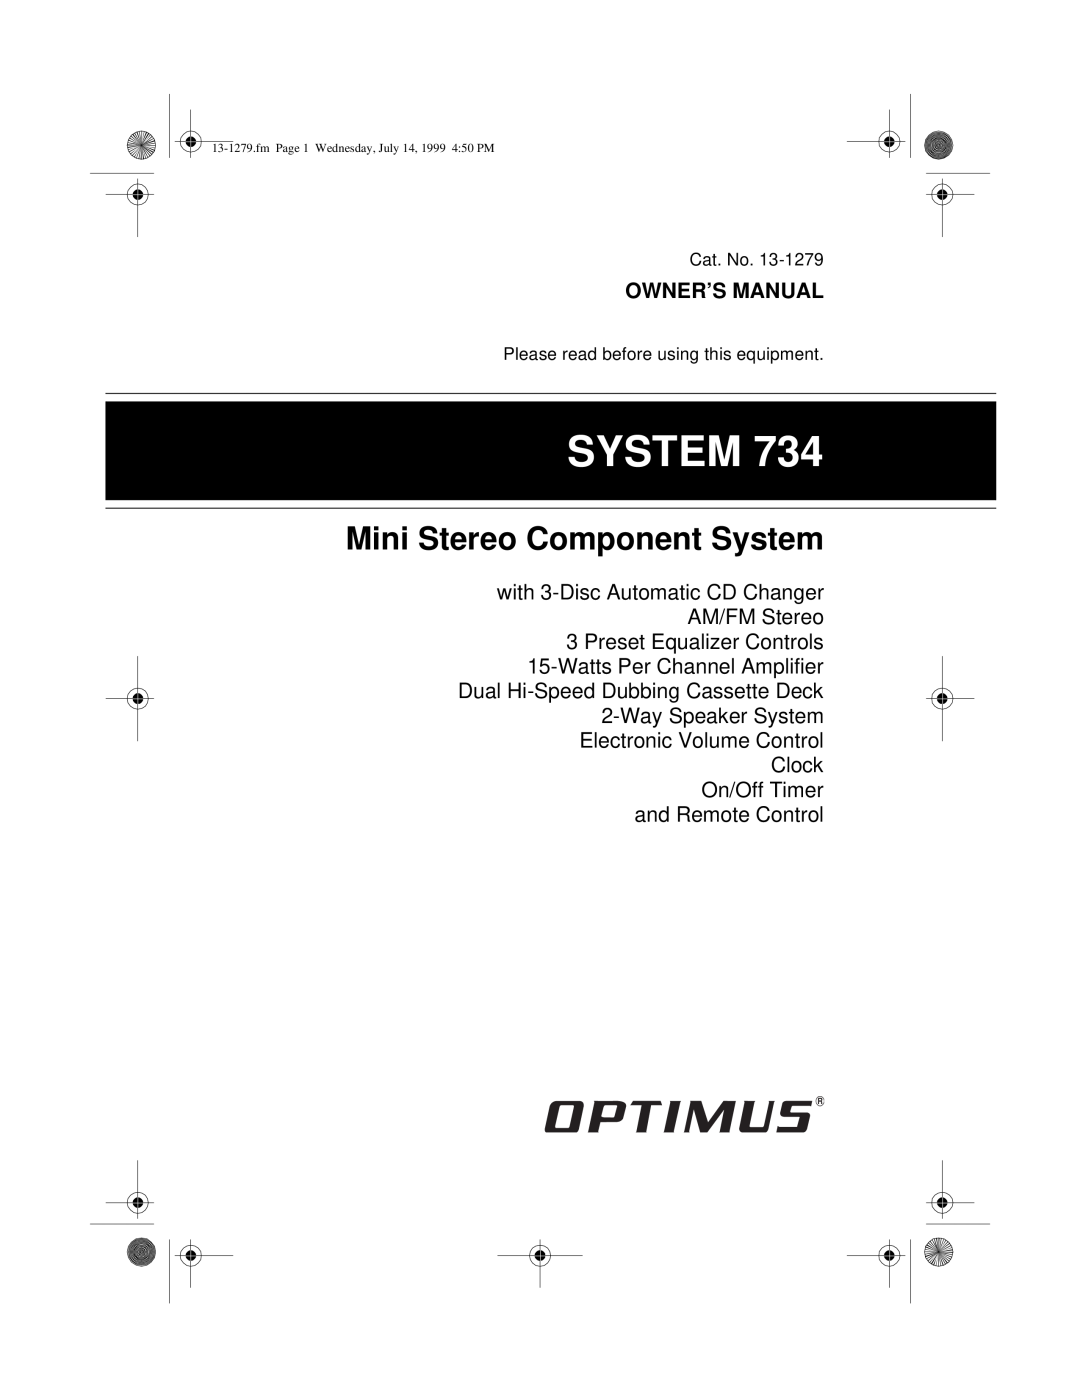 Optimus SYSTEM 734 owner manual Mini Stereo Component System 